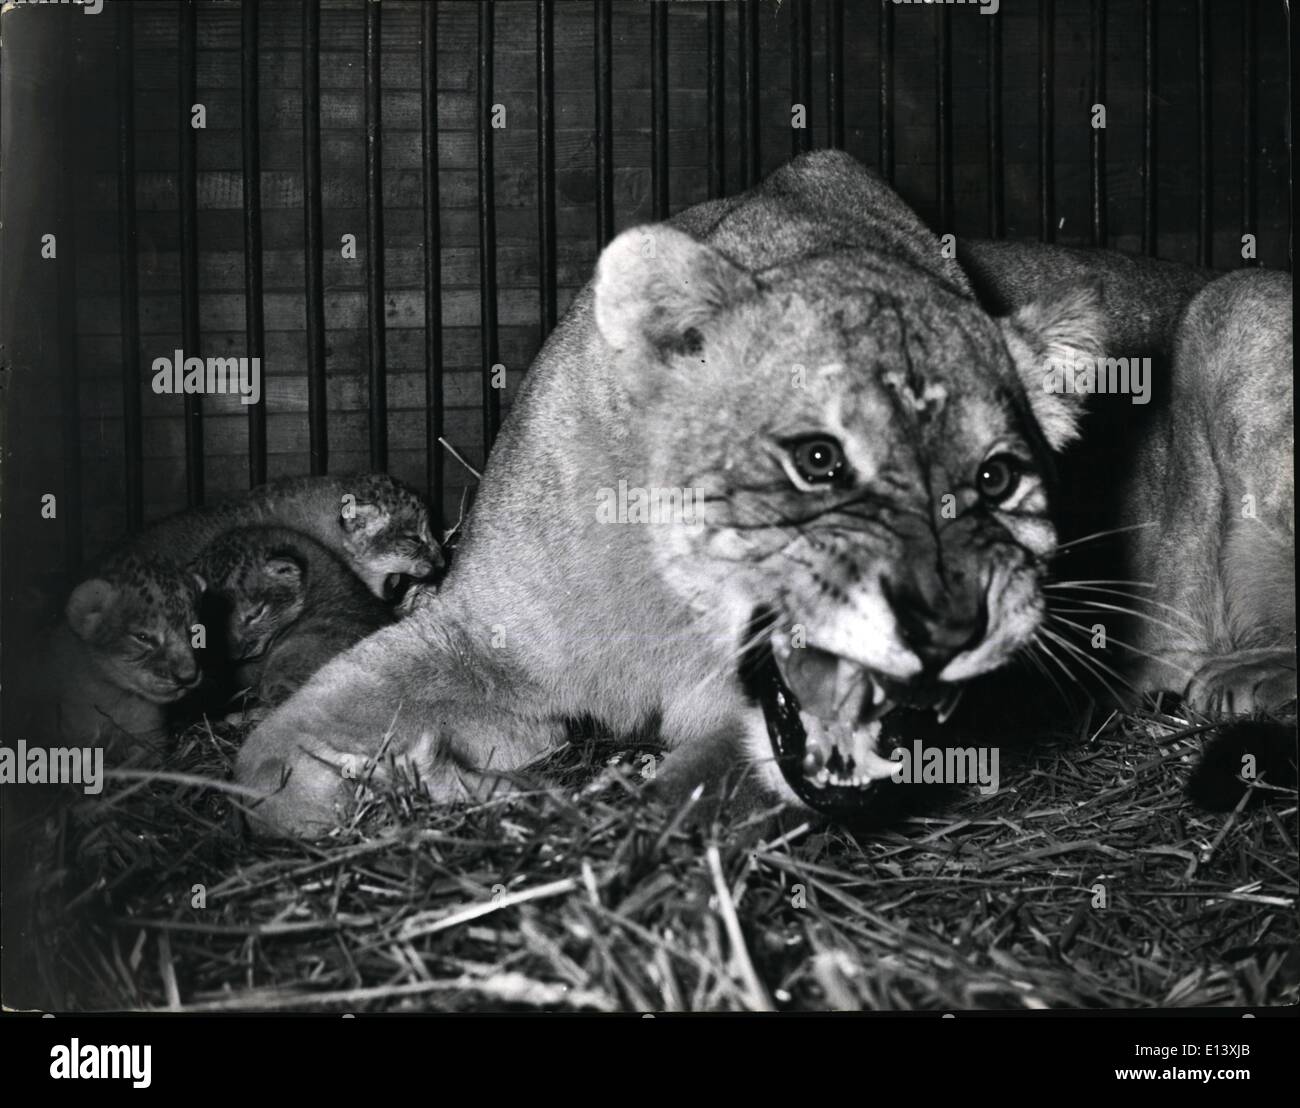 Mar. 27, 2012 - Lion Cubs Born On Parts Train - Arrive In London. Looking Very Tough - Is Elizabeth.. Elizabeth a Circus lioness on way to the Earl's Court circus - gave birth to quads on a Paris train - causing delay in the train departure time.. The Circus officials had to apply for four extra animals to be brought into the country.. The Lioness and her babies crossed Dover - and travelled by train to London. Keystone Photo Shows:- Elizabeth looks very ferocious as she guards her babies - on arrival at West Brompton Station - on way to the circus. Stock Photo